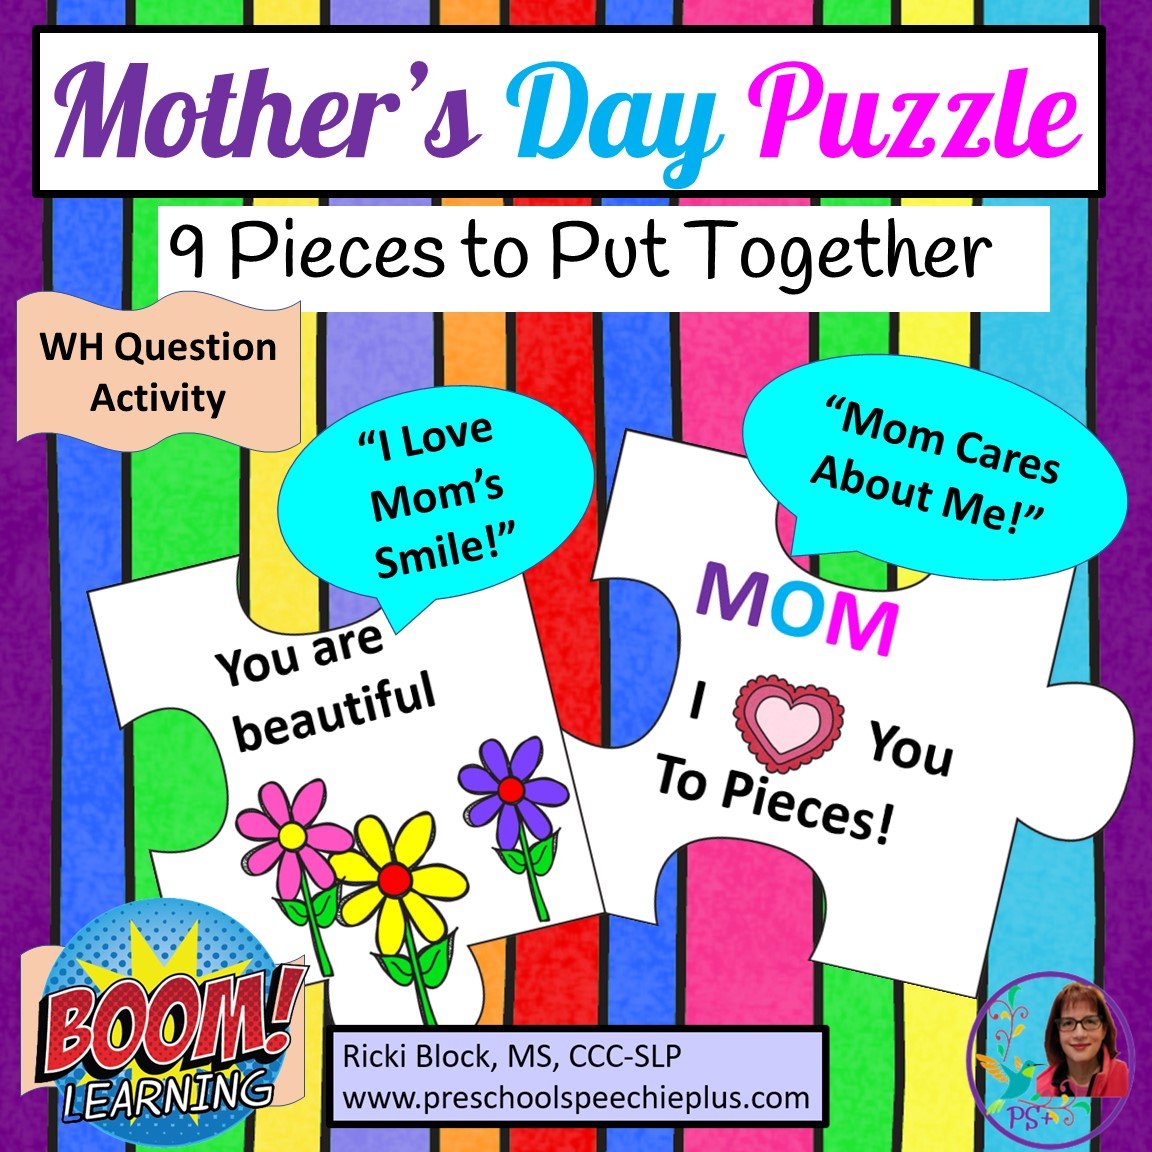 Mother's Day Puzzle2 